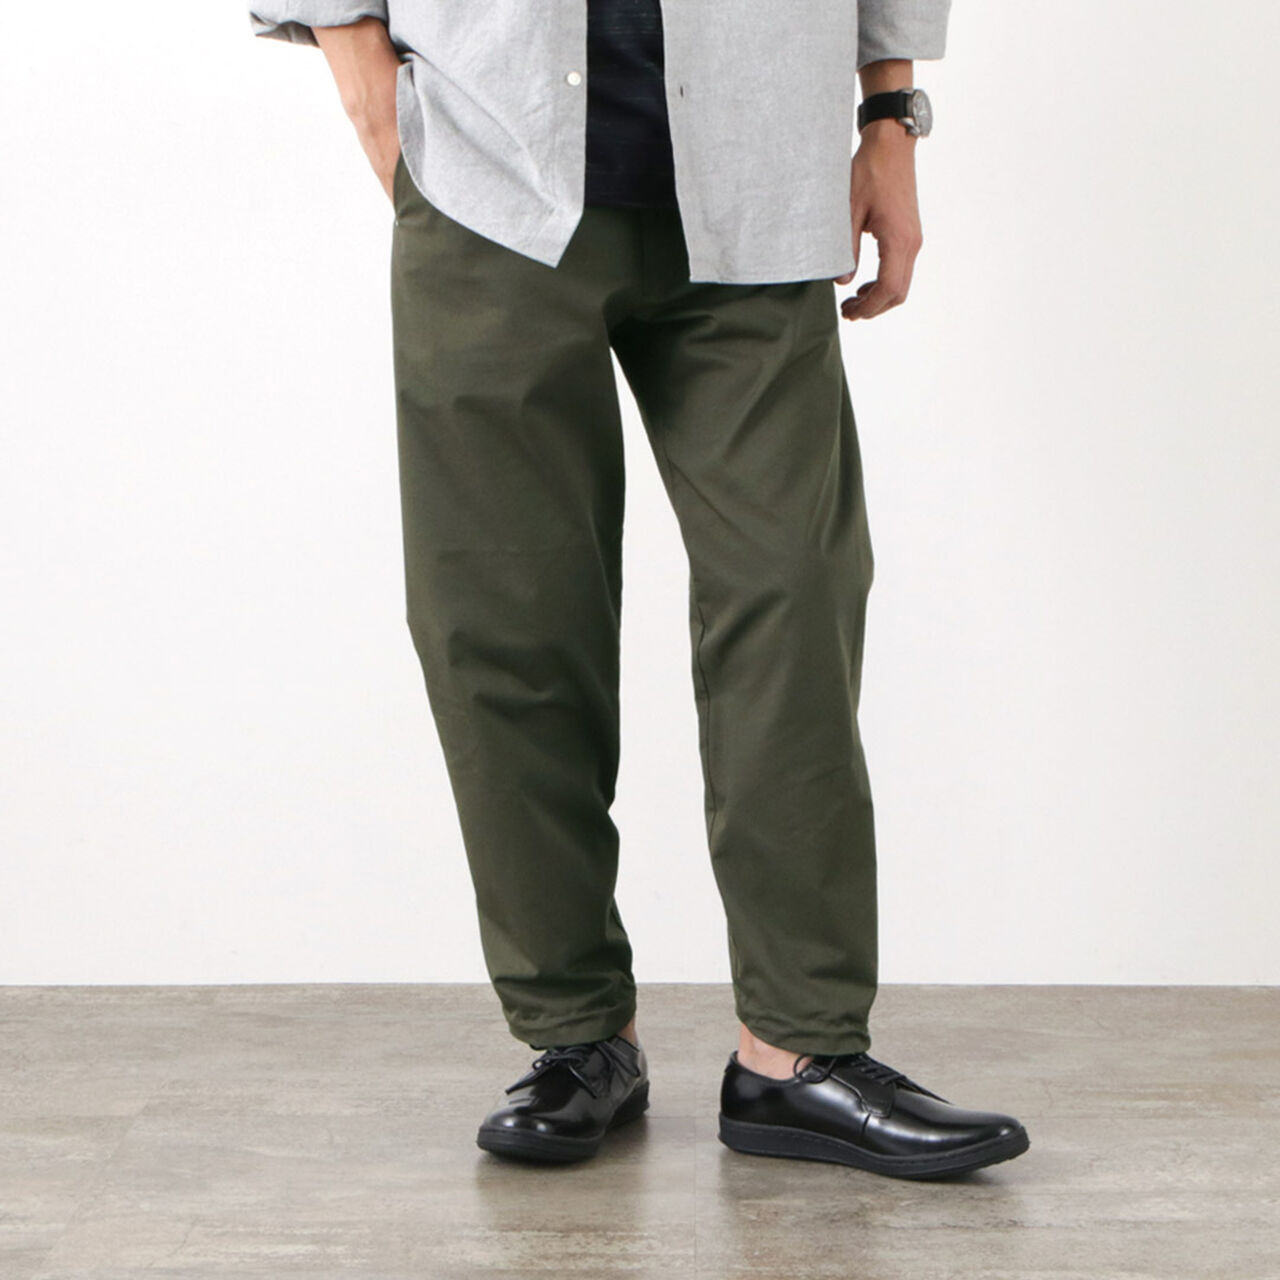 Go Out Pants,Olive, large image number 0